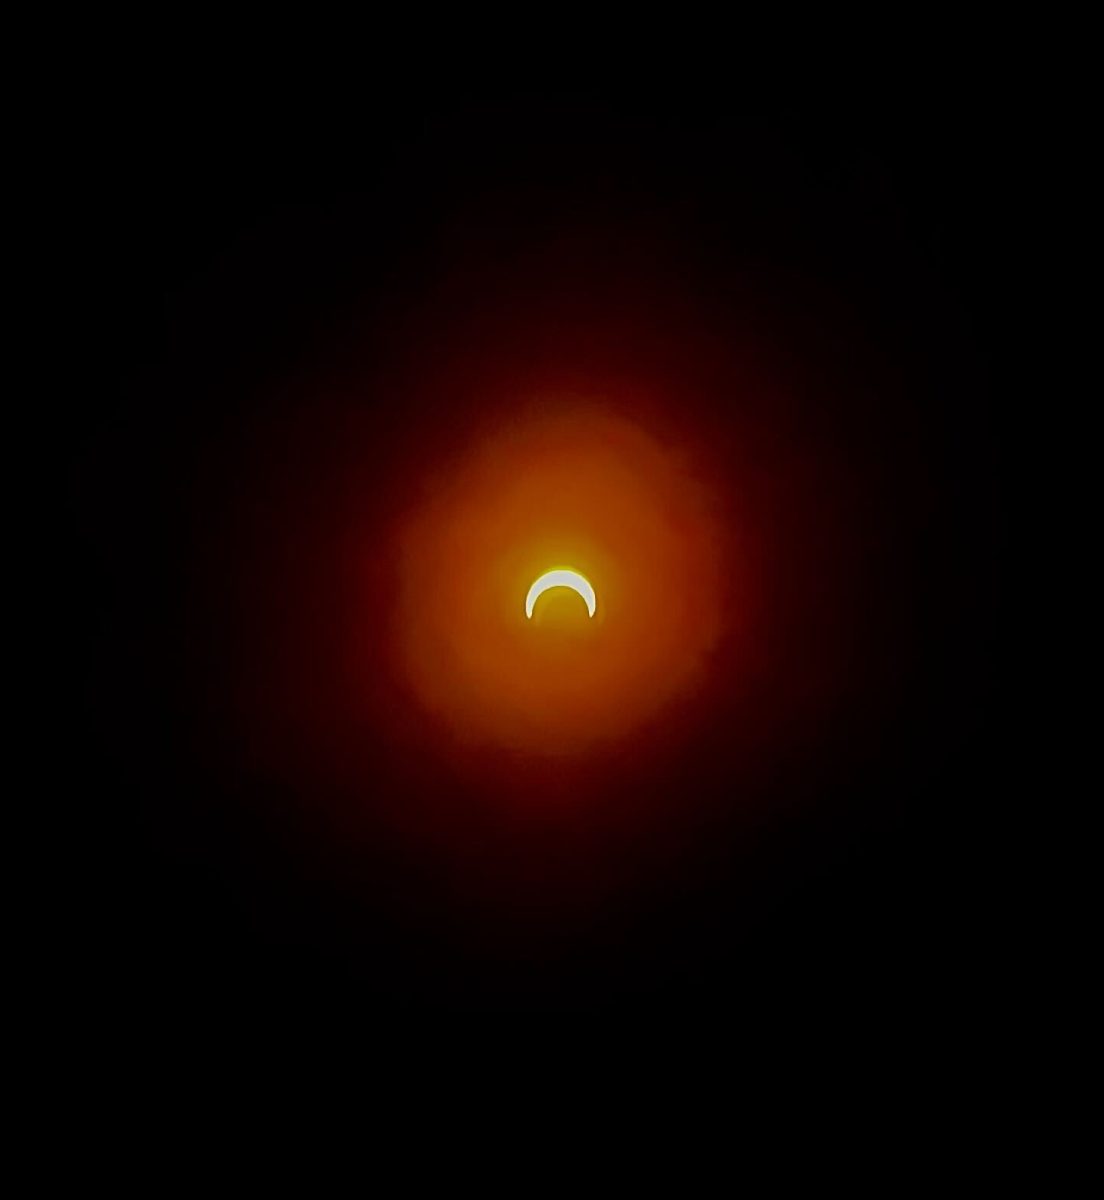 The+ring+of+fire+eclipse+caused+the+sun+to+appear+black+in+the+middle+with+a+bright+glowing+ring+around+it.+Many+Austin+residents+observed+the+eclipse+from+right+outside+their+homes.